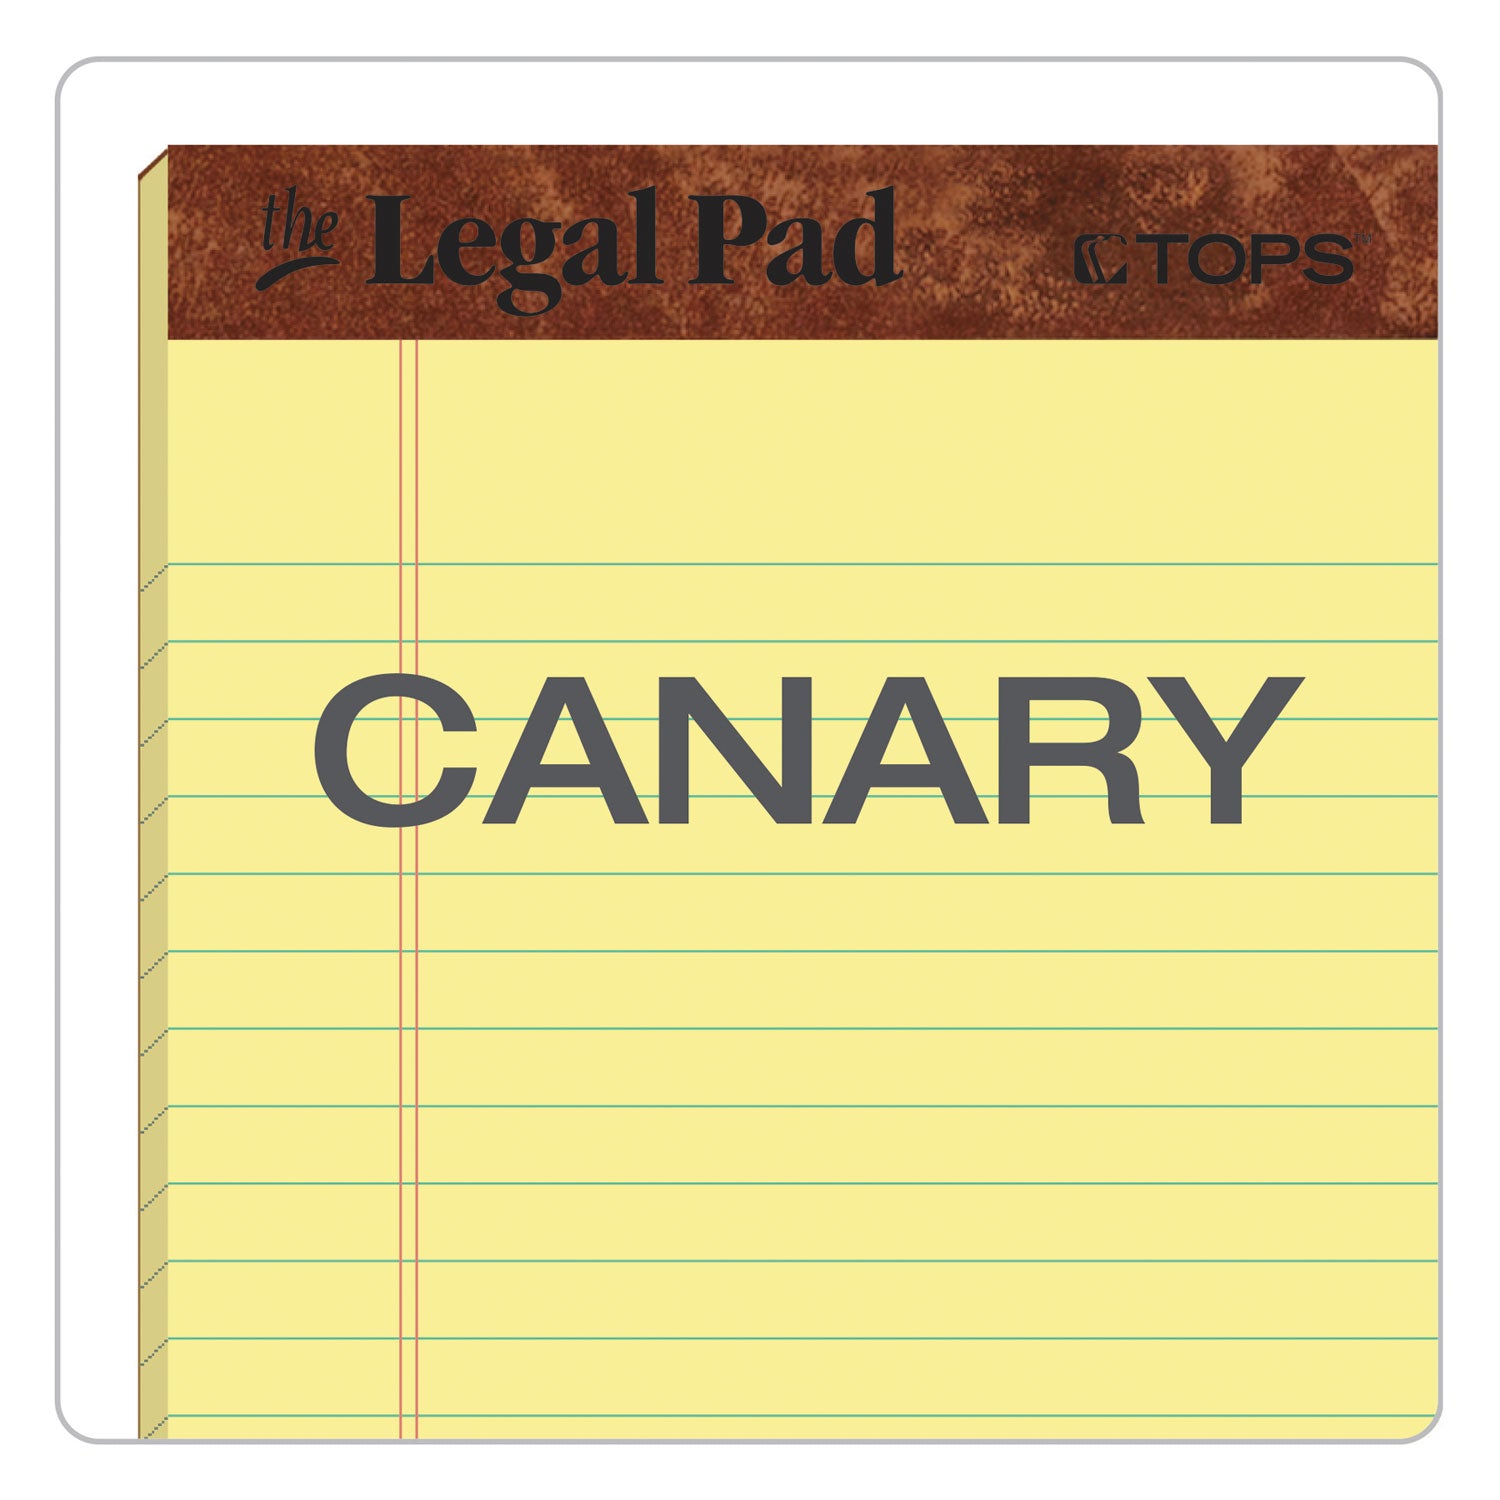 The Legal Pad" Ruled Perforated Pads, Narrow Rule, 50 Canary-Yellow 5 x 8 Sheets, Dozen - 